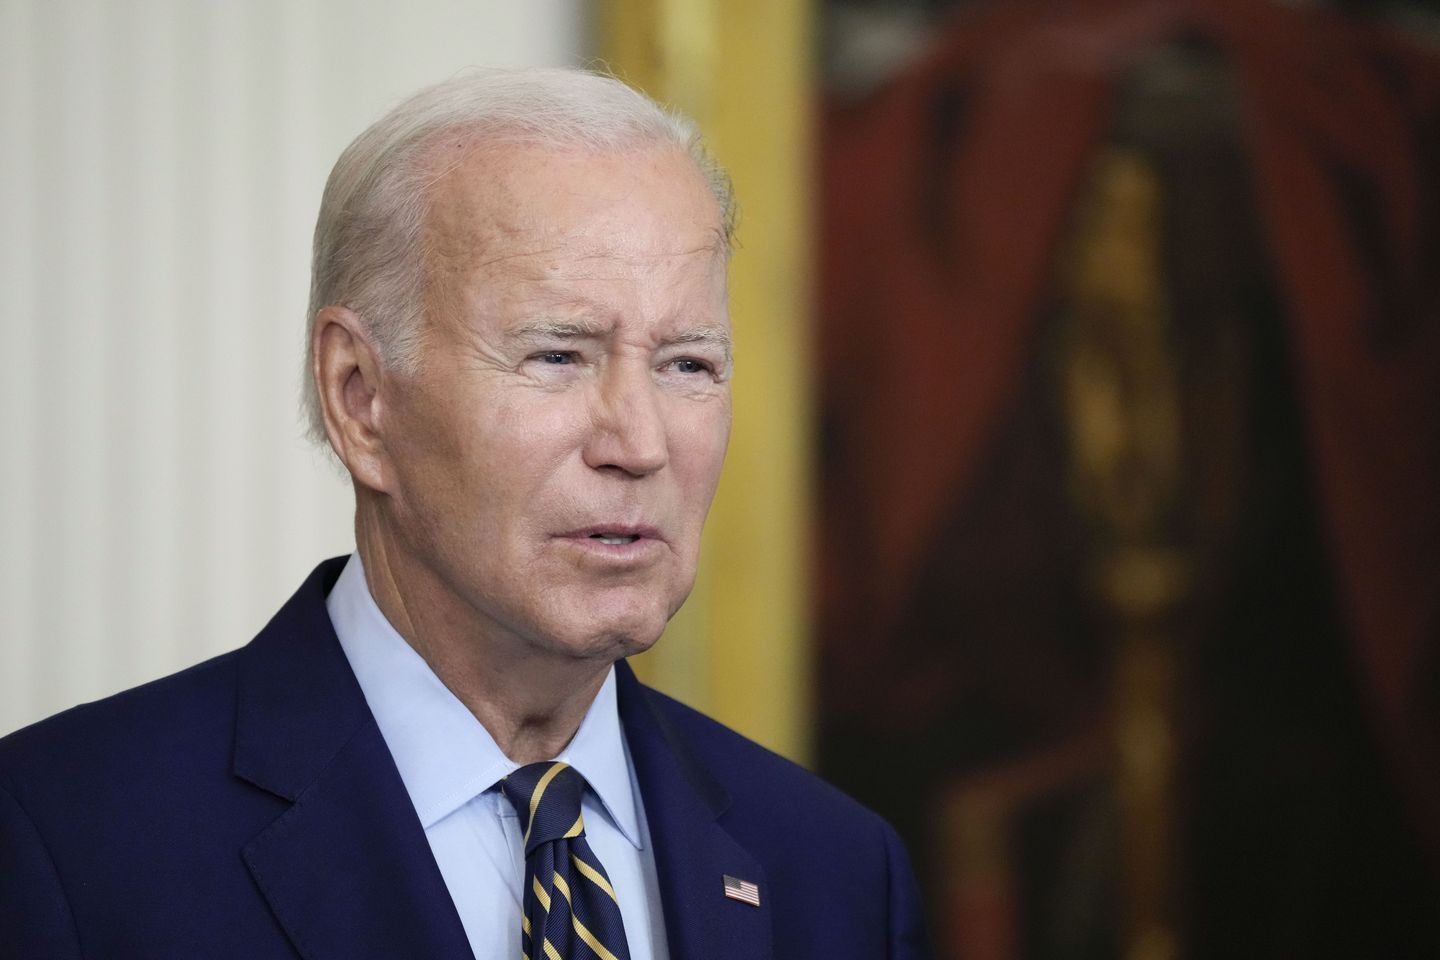 Joe Biden polling underwater on climate change ahead of speech touting Inflation Reduction Act